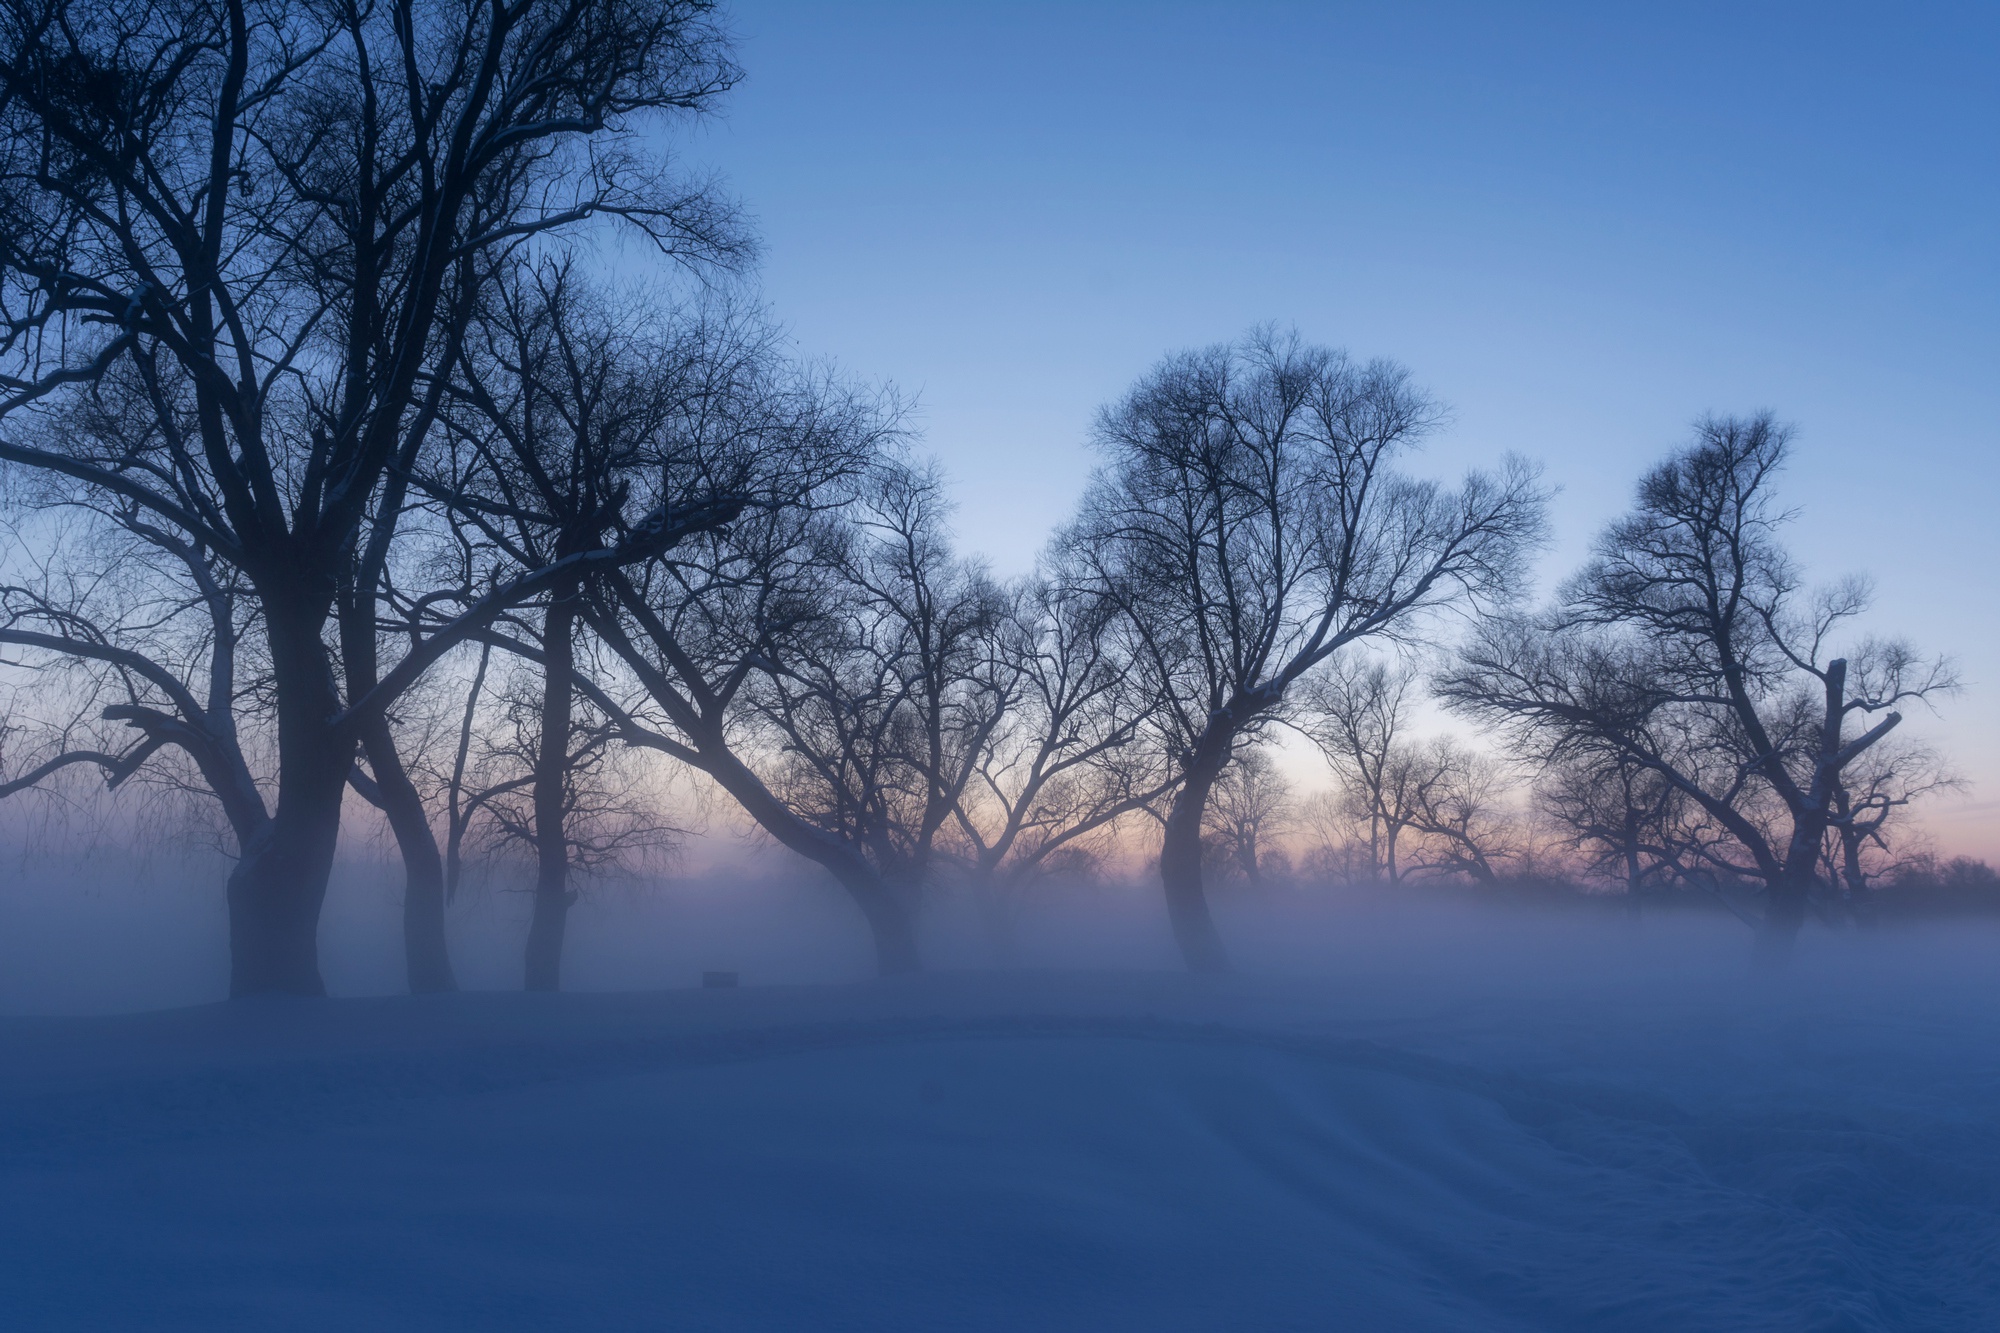 General 2000x1333 morning Russia cold trees ice snow winter nature outdoors mist